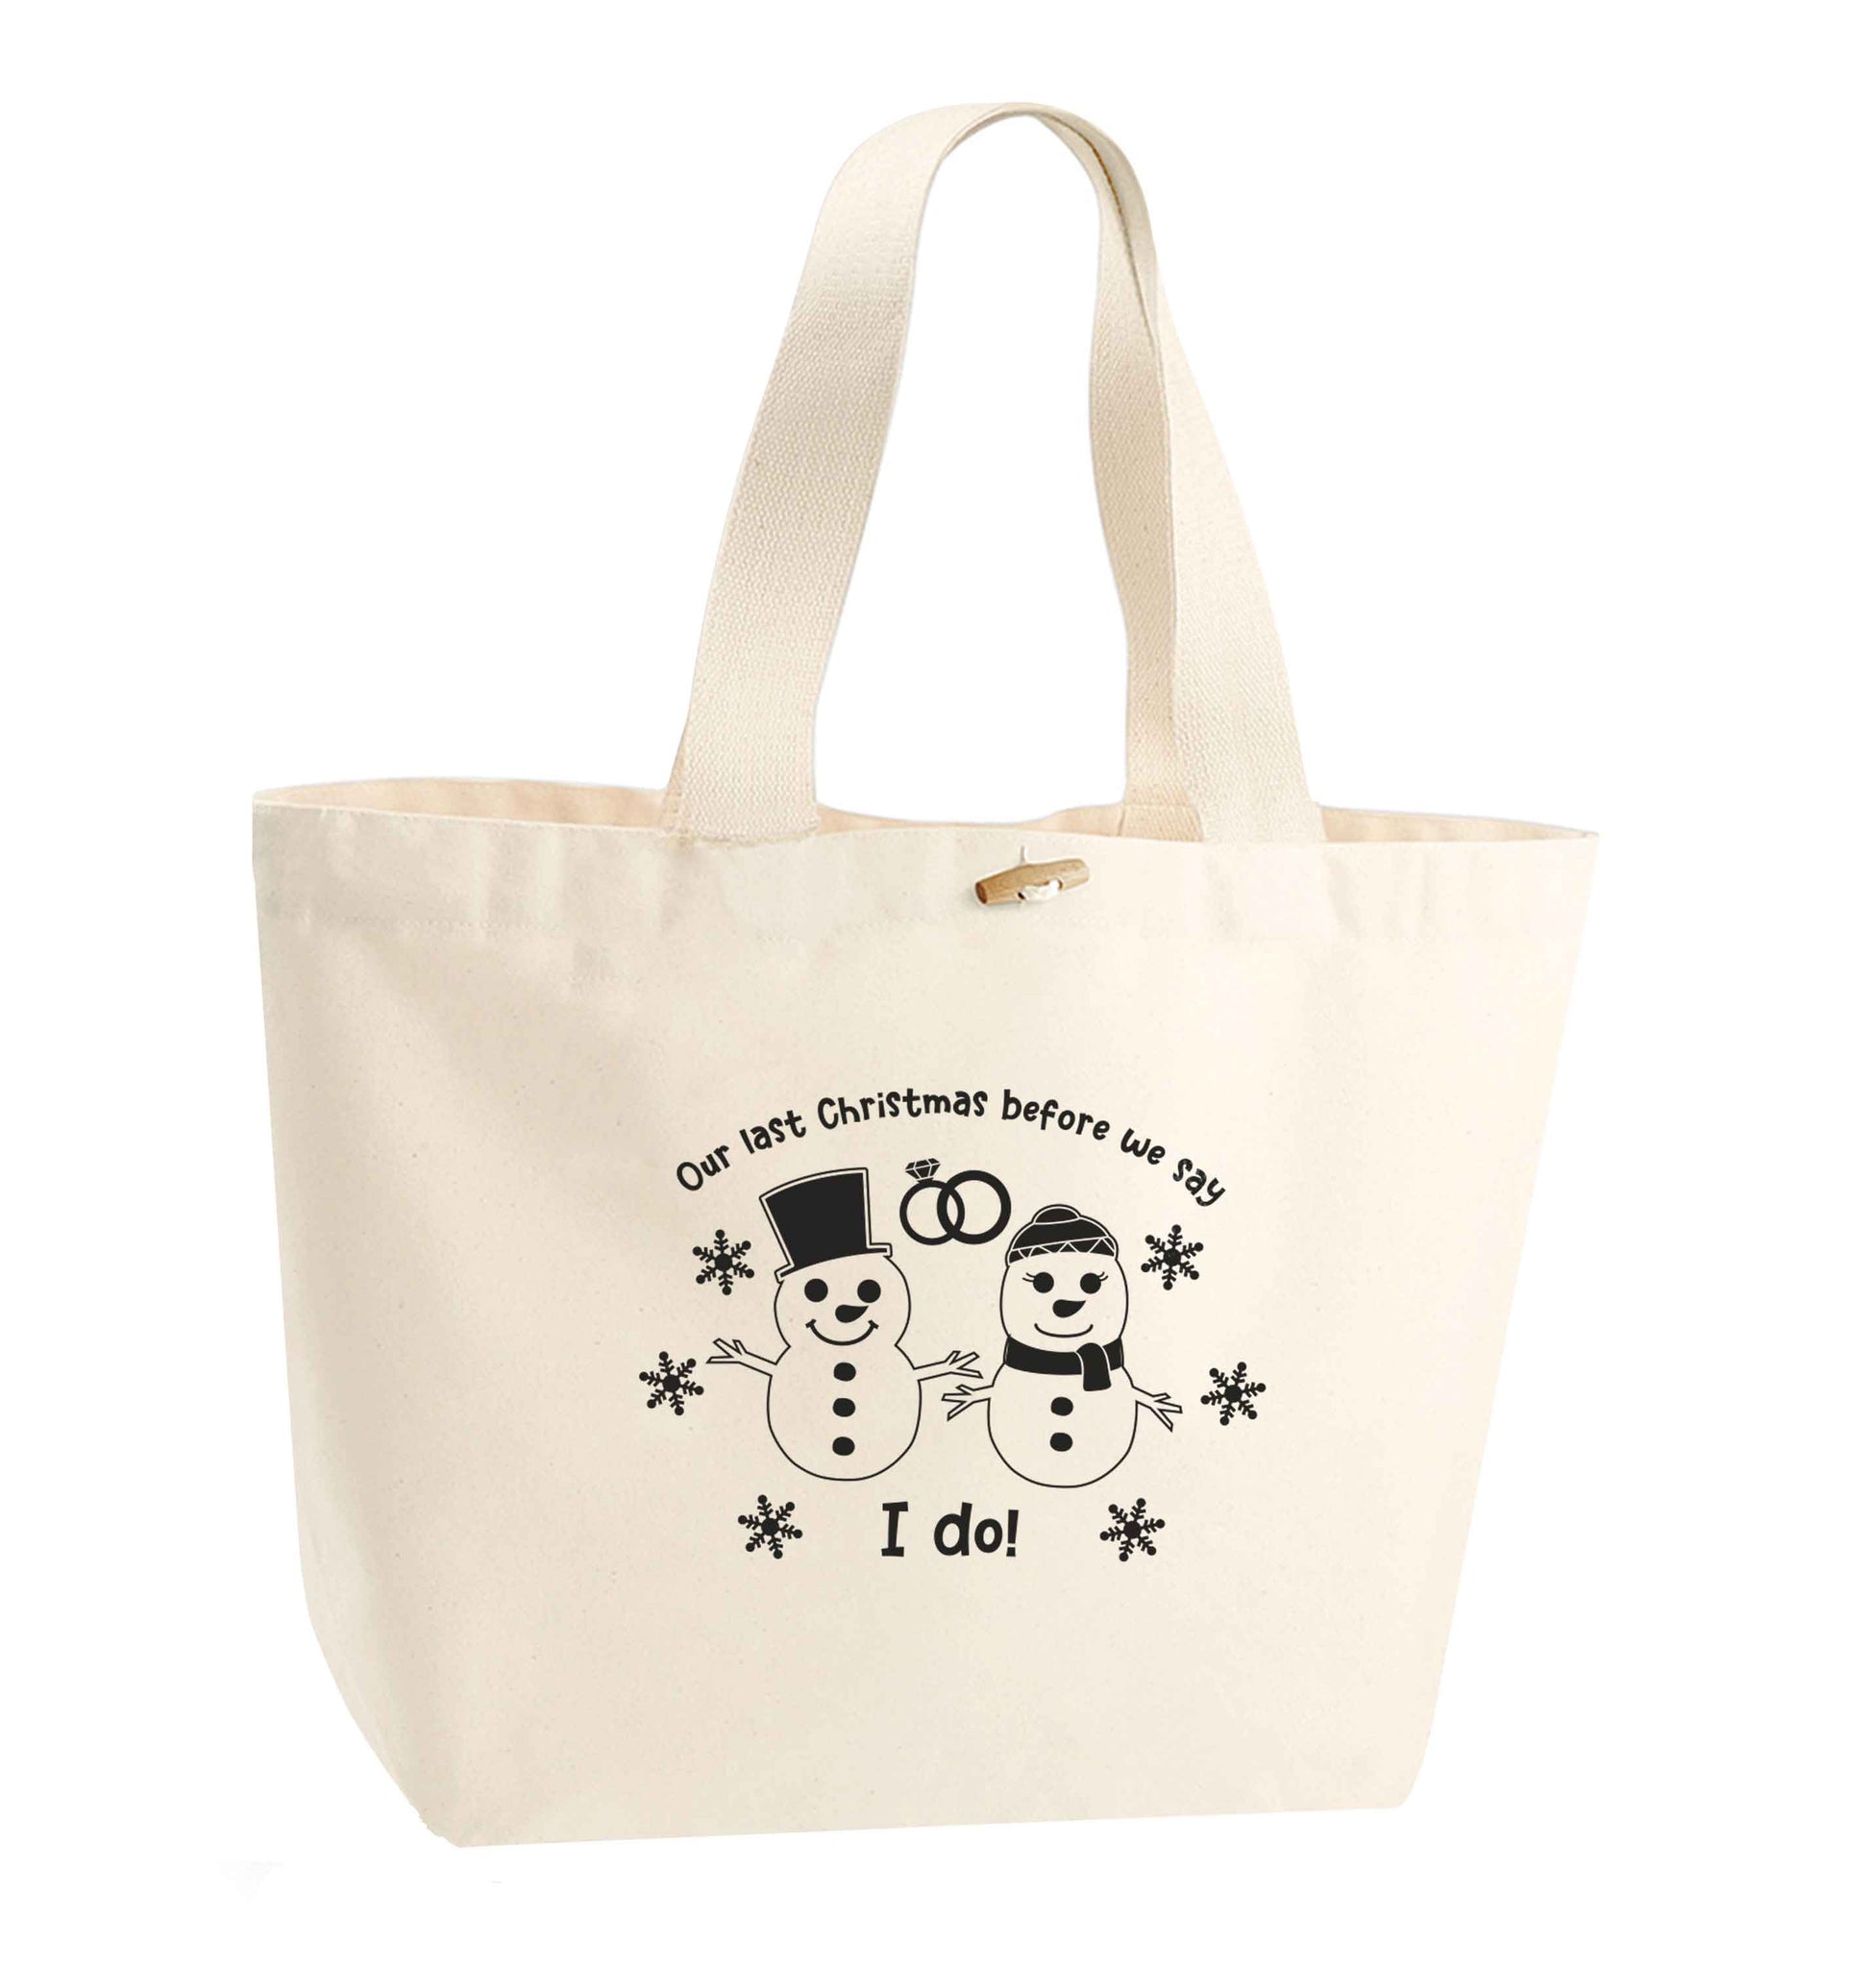 Last Christmas before we say I do organic cotton premium tote bag with wooden toggle in natural